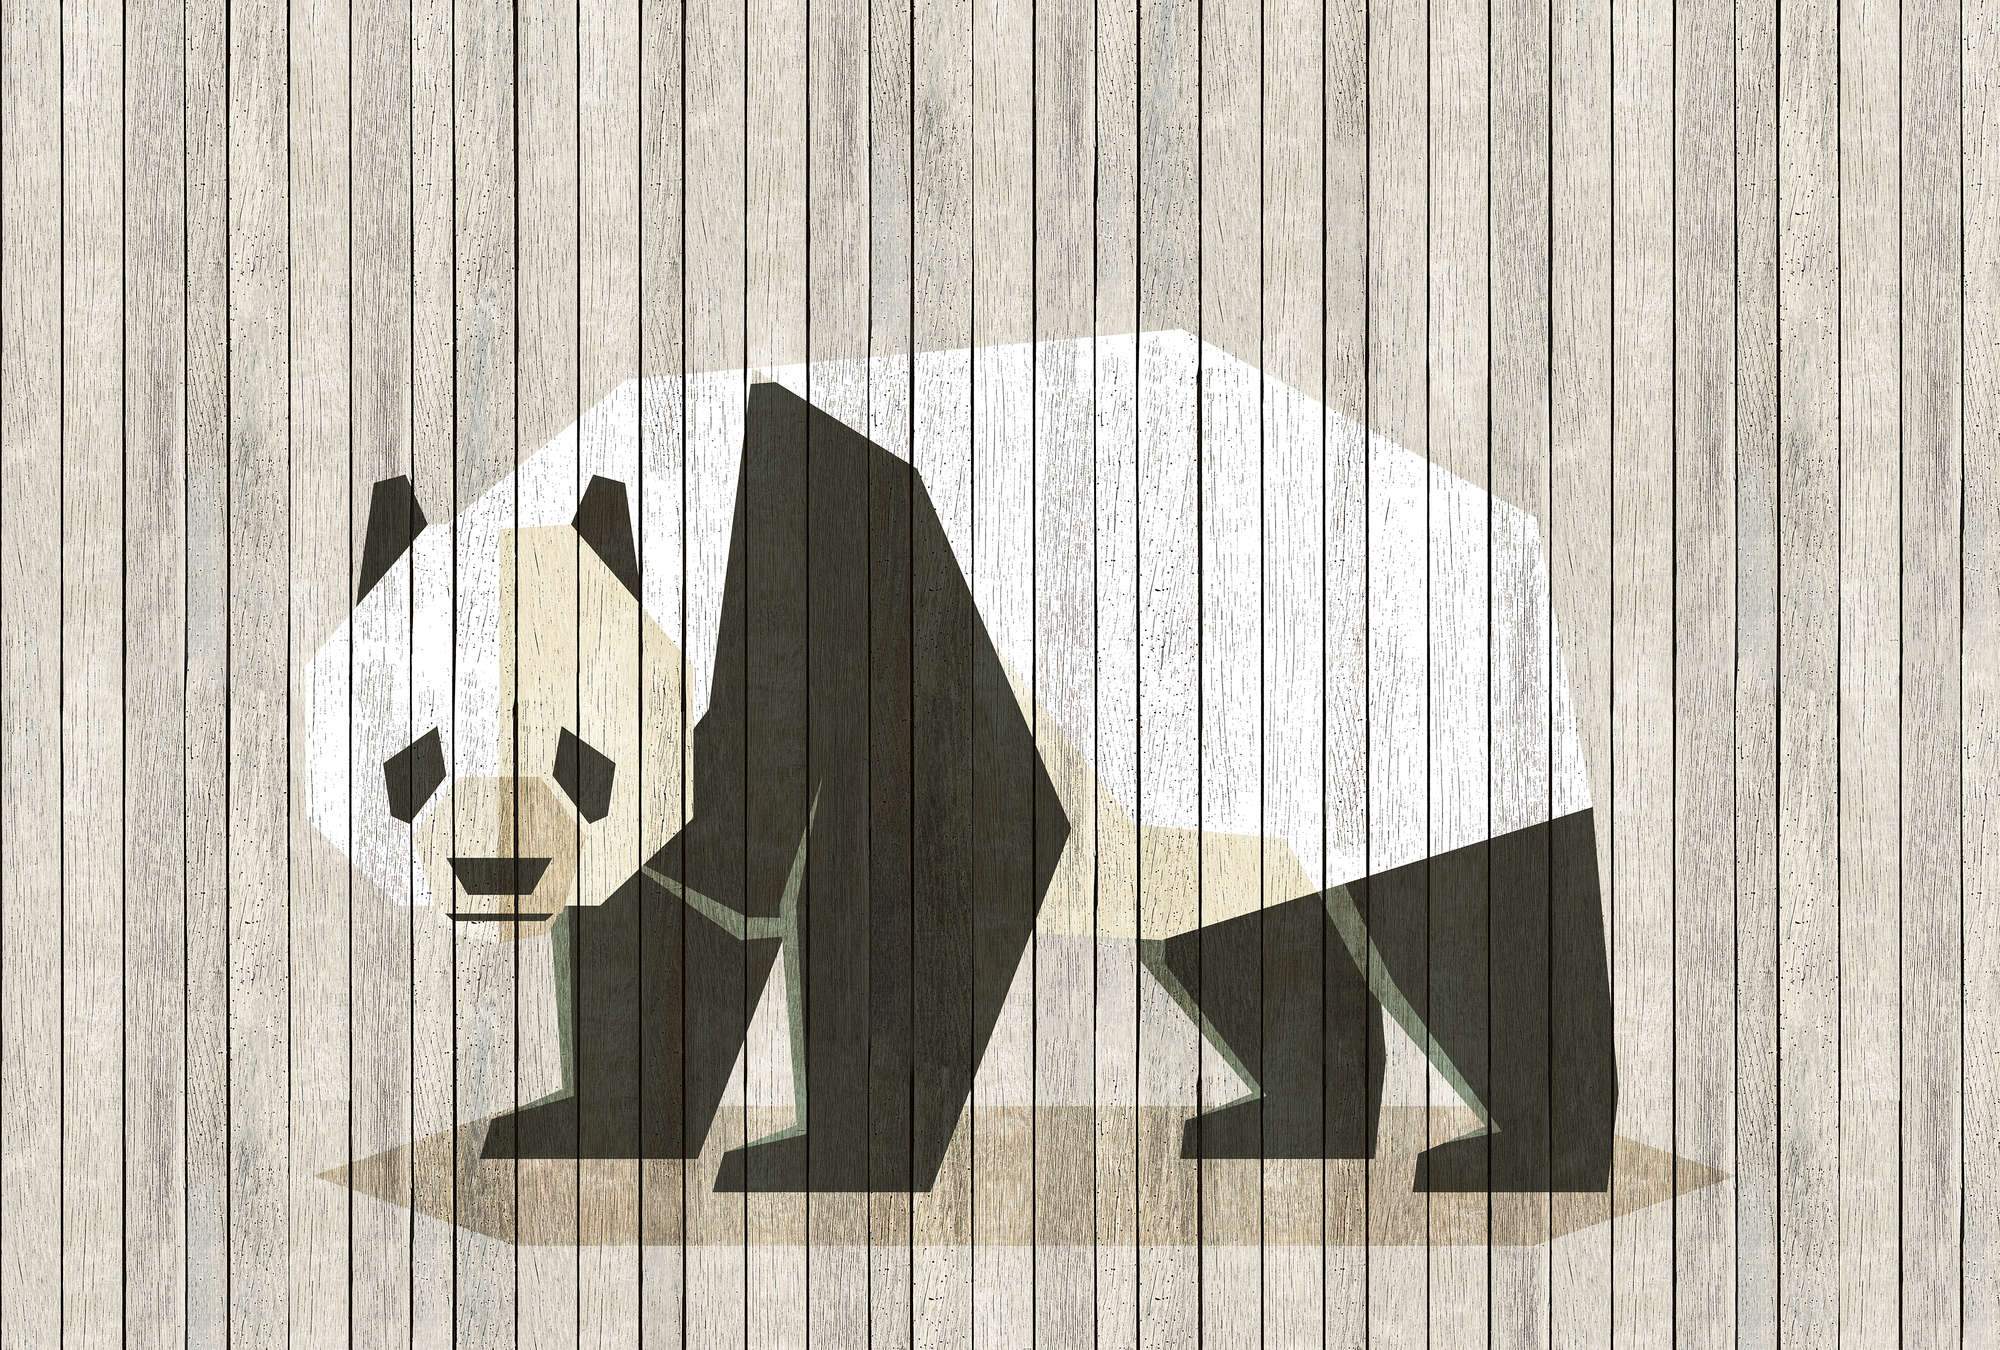             Born to Be Wild 2 - Photo wallpaper on wood panel structure with panda & board wall - Beige, Brown | Matt smooth fleece
        